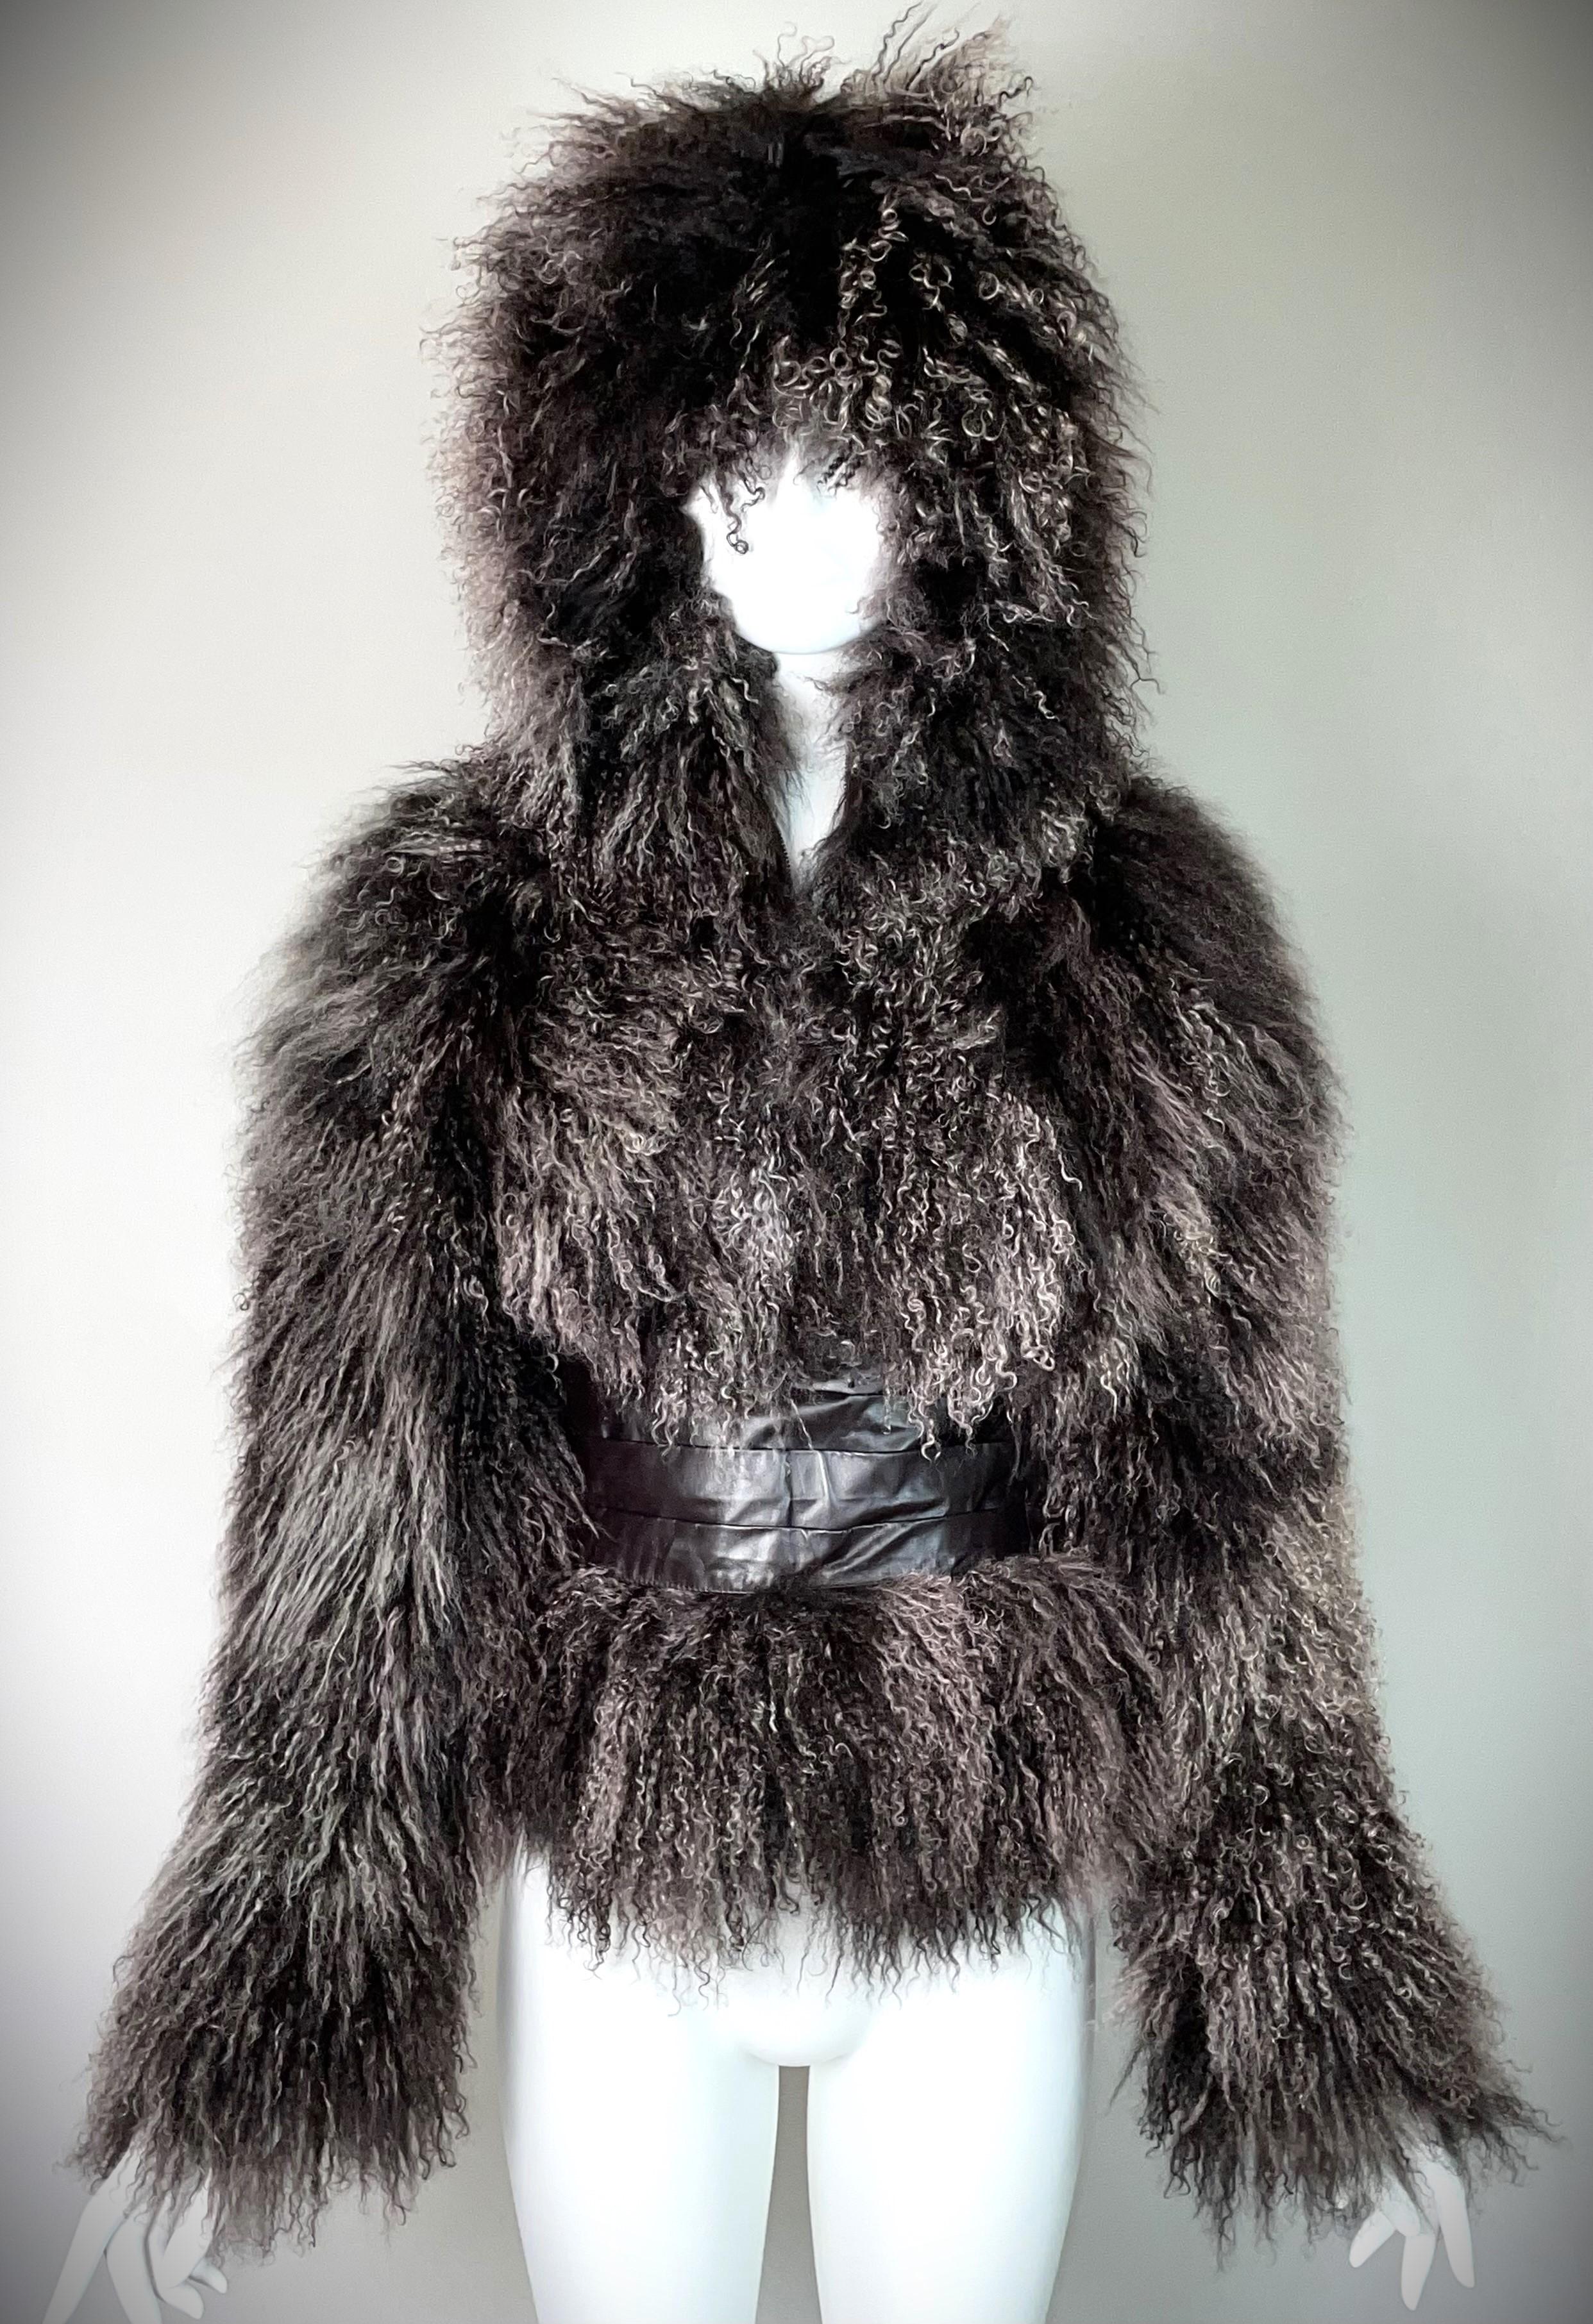 **THANK YOU FOR SHOPPING WITH MES DEUX FILLES**

DESIGNER: F/W 2004 Alexander McQueen Runway
CONDITION: Good- no flaws
COUNTRY MADE: Italy
FABRIC: Curly lamb fur & leather
SIZE: 40
MEASUREMENTS; provided as a courtesy only- not a guarantee of fit: